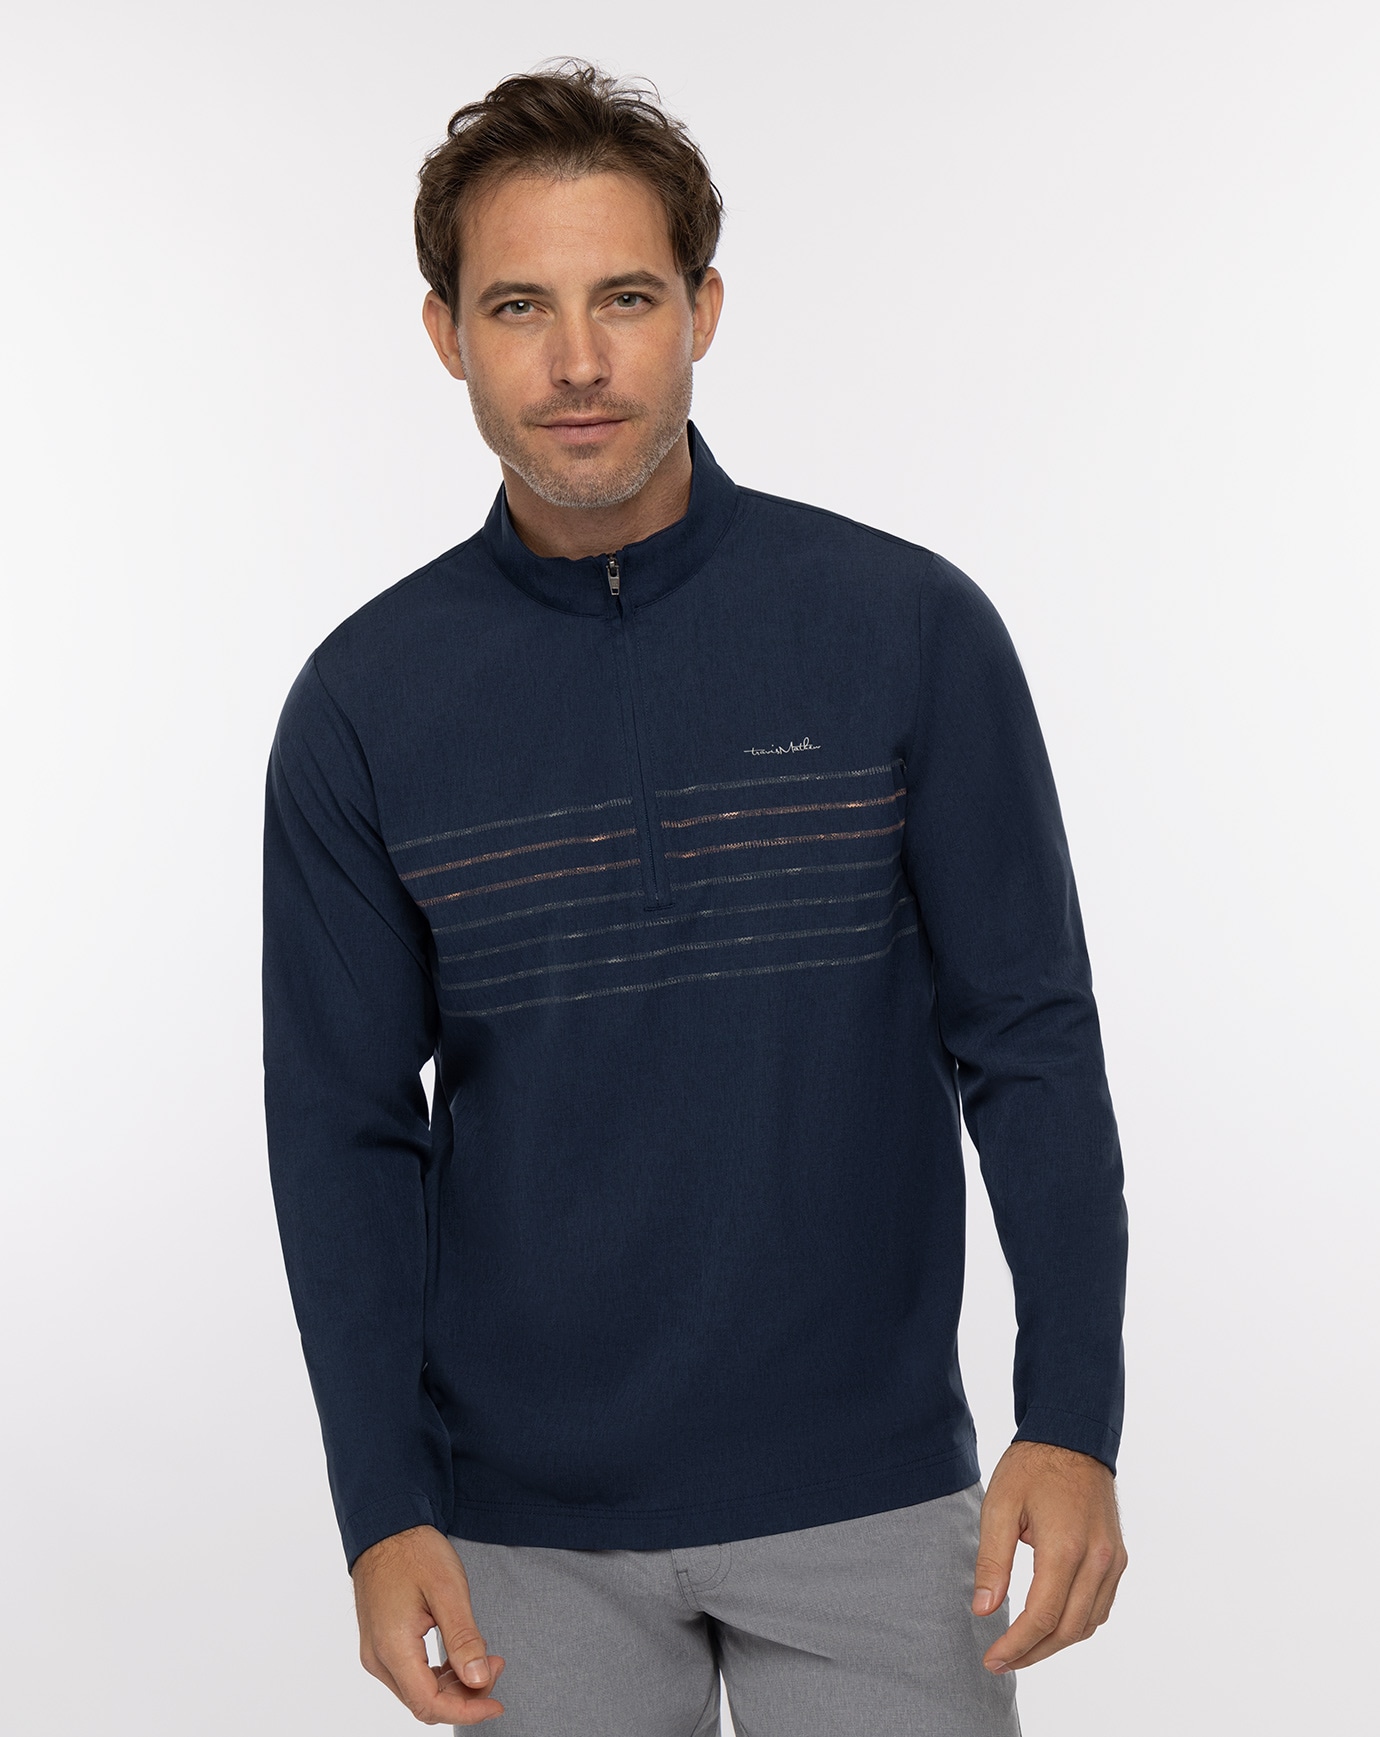 Related Product - SOME BEACH QUARTER ZIP